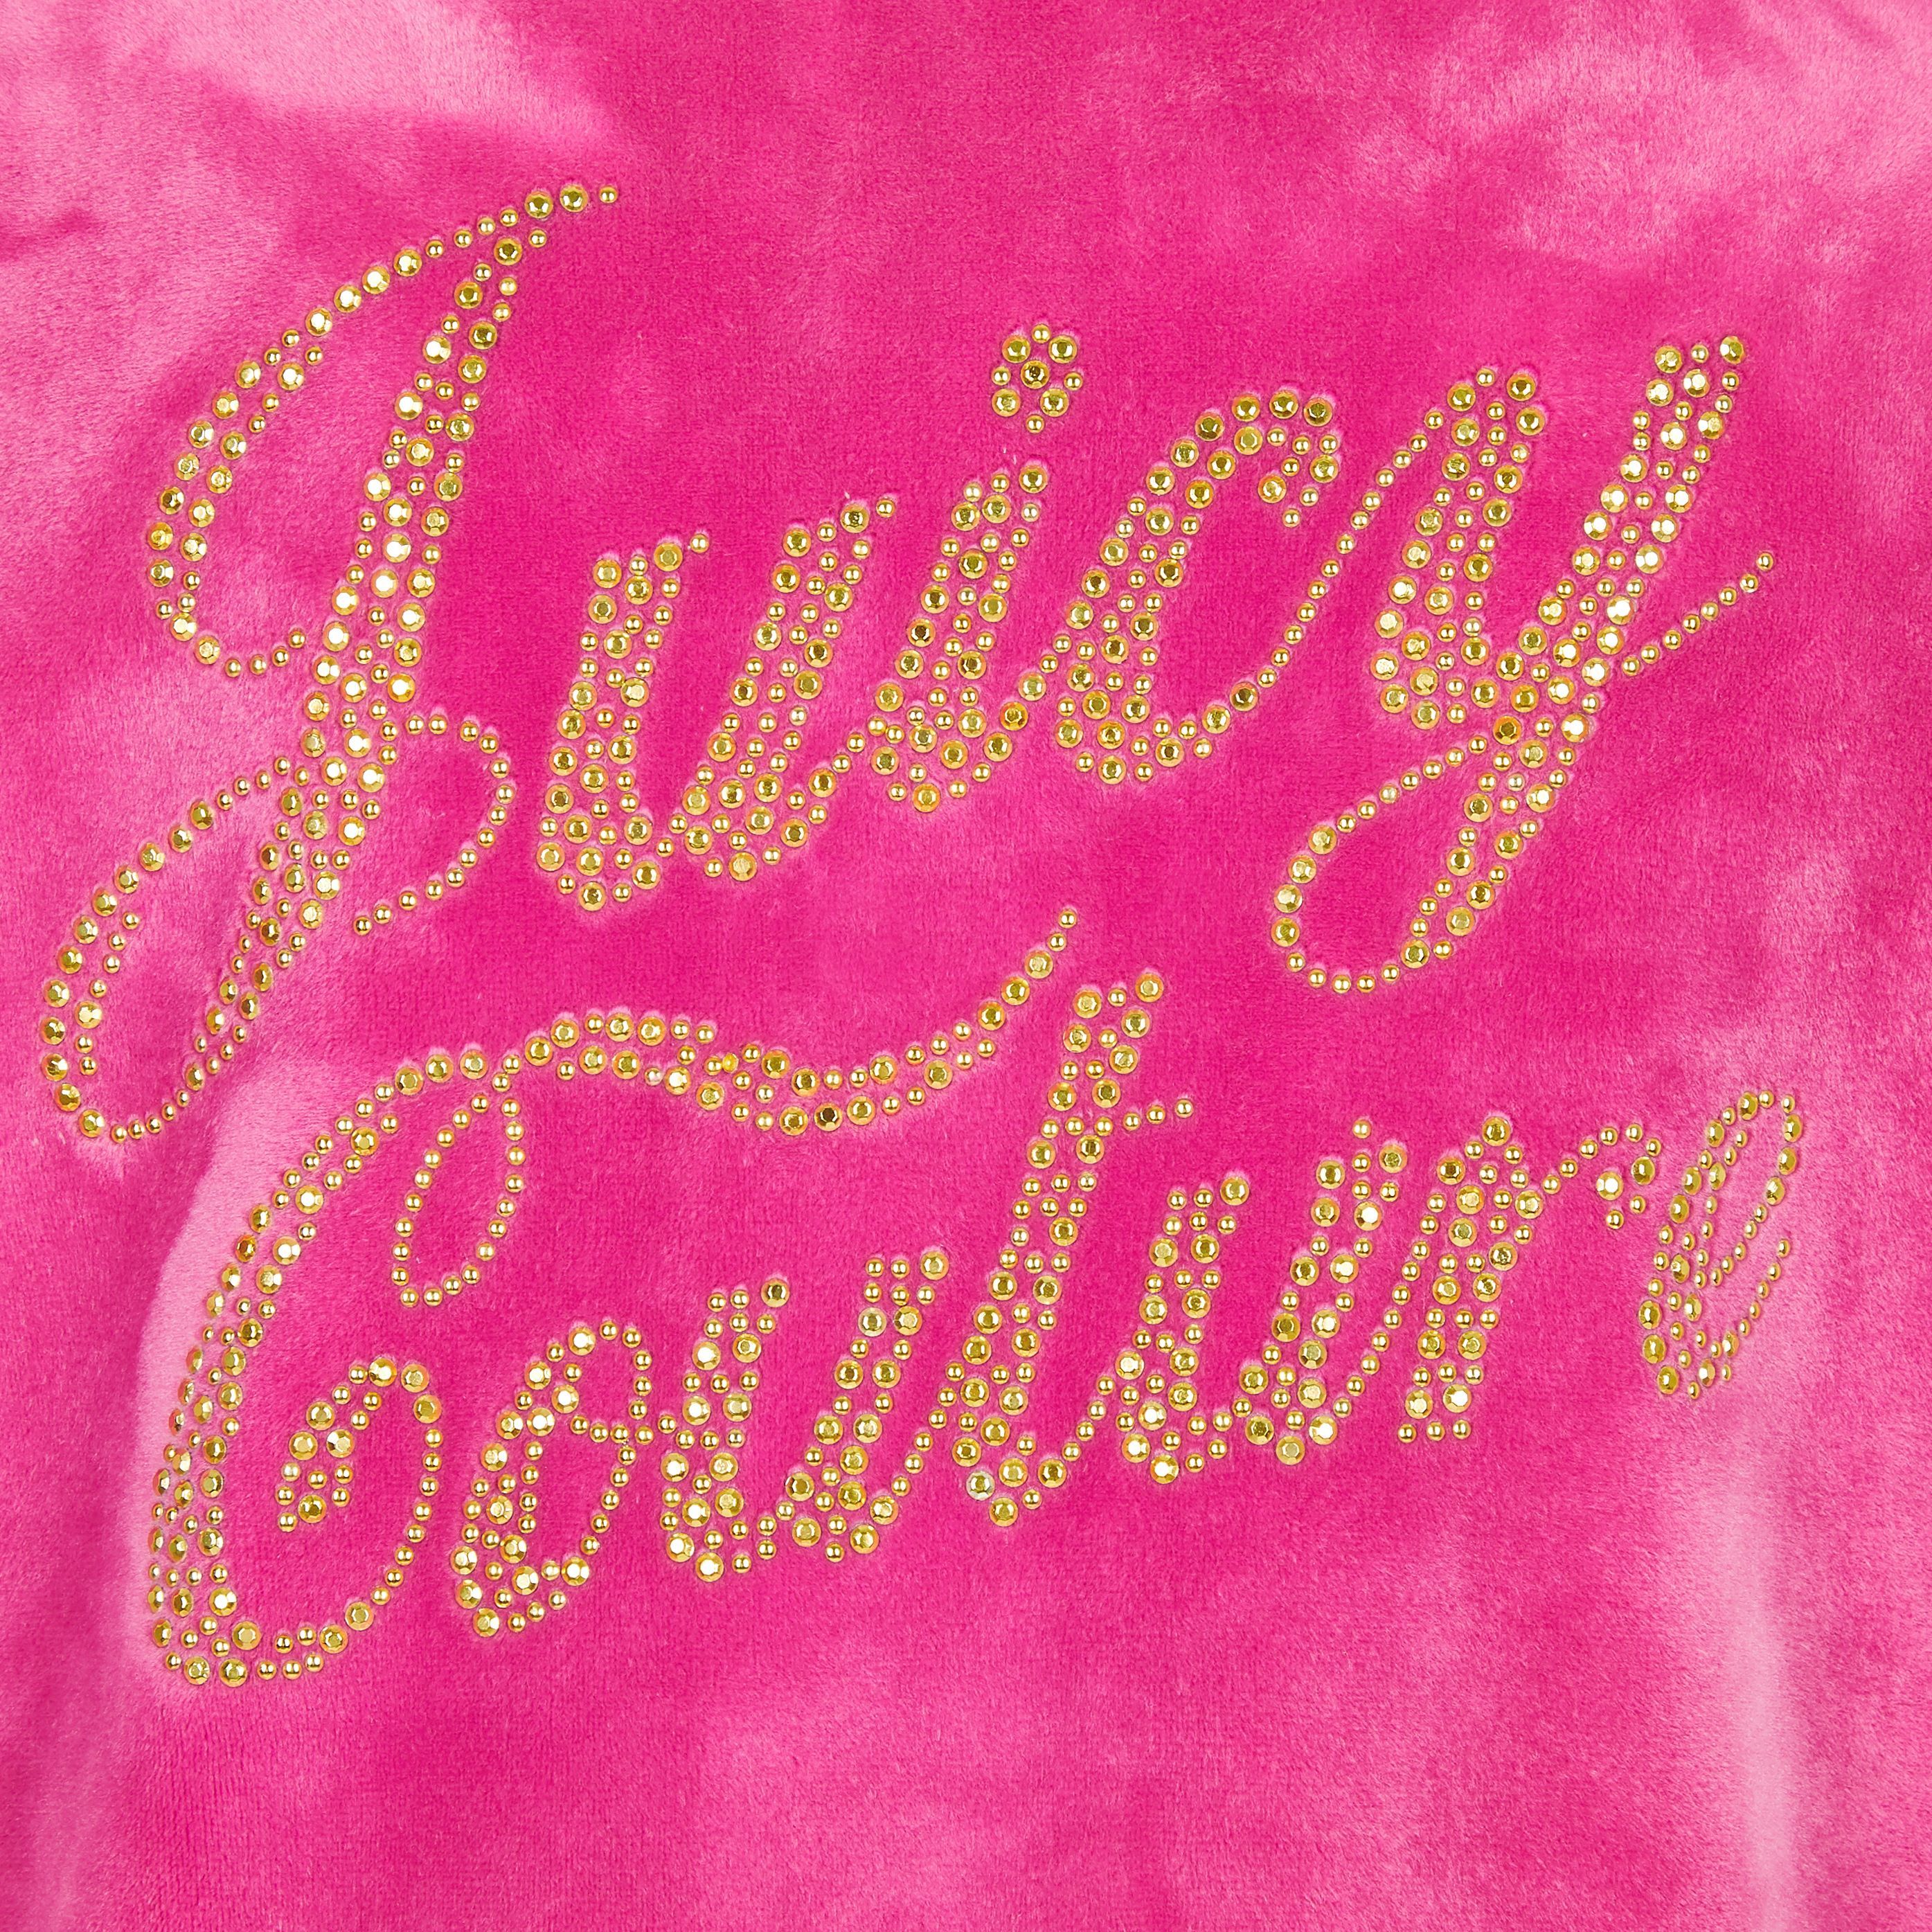 Digital Print on Smooth Vinyl  Printed for Juicy Couture  Designer  Wallcoverings and Fabrics